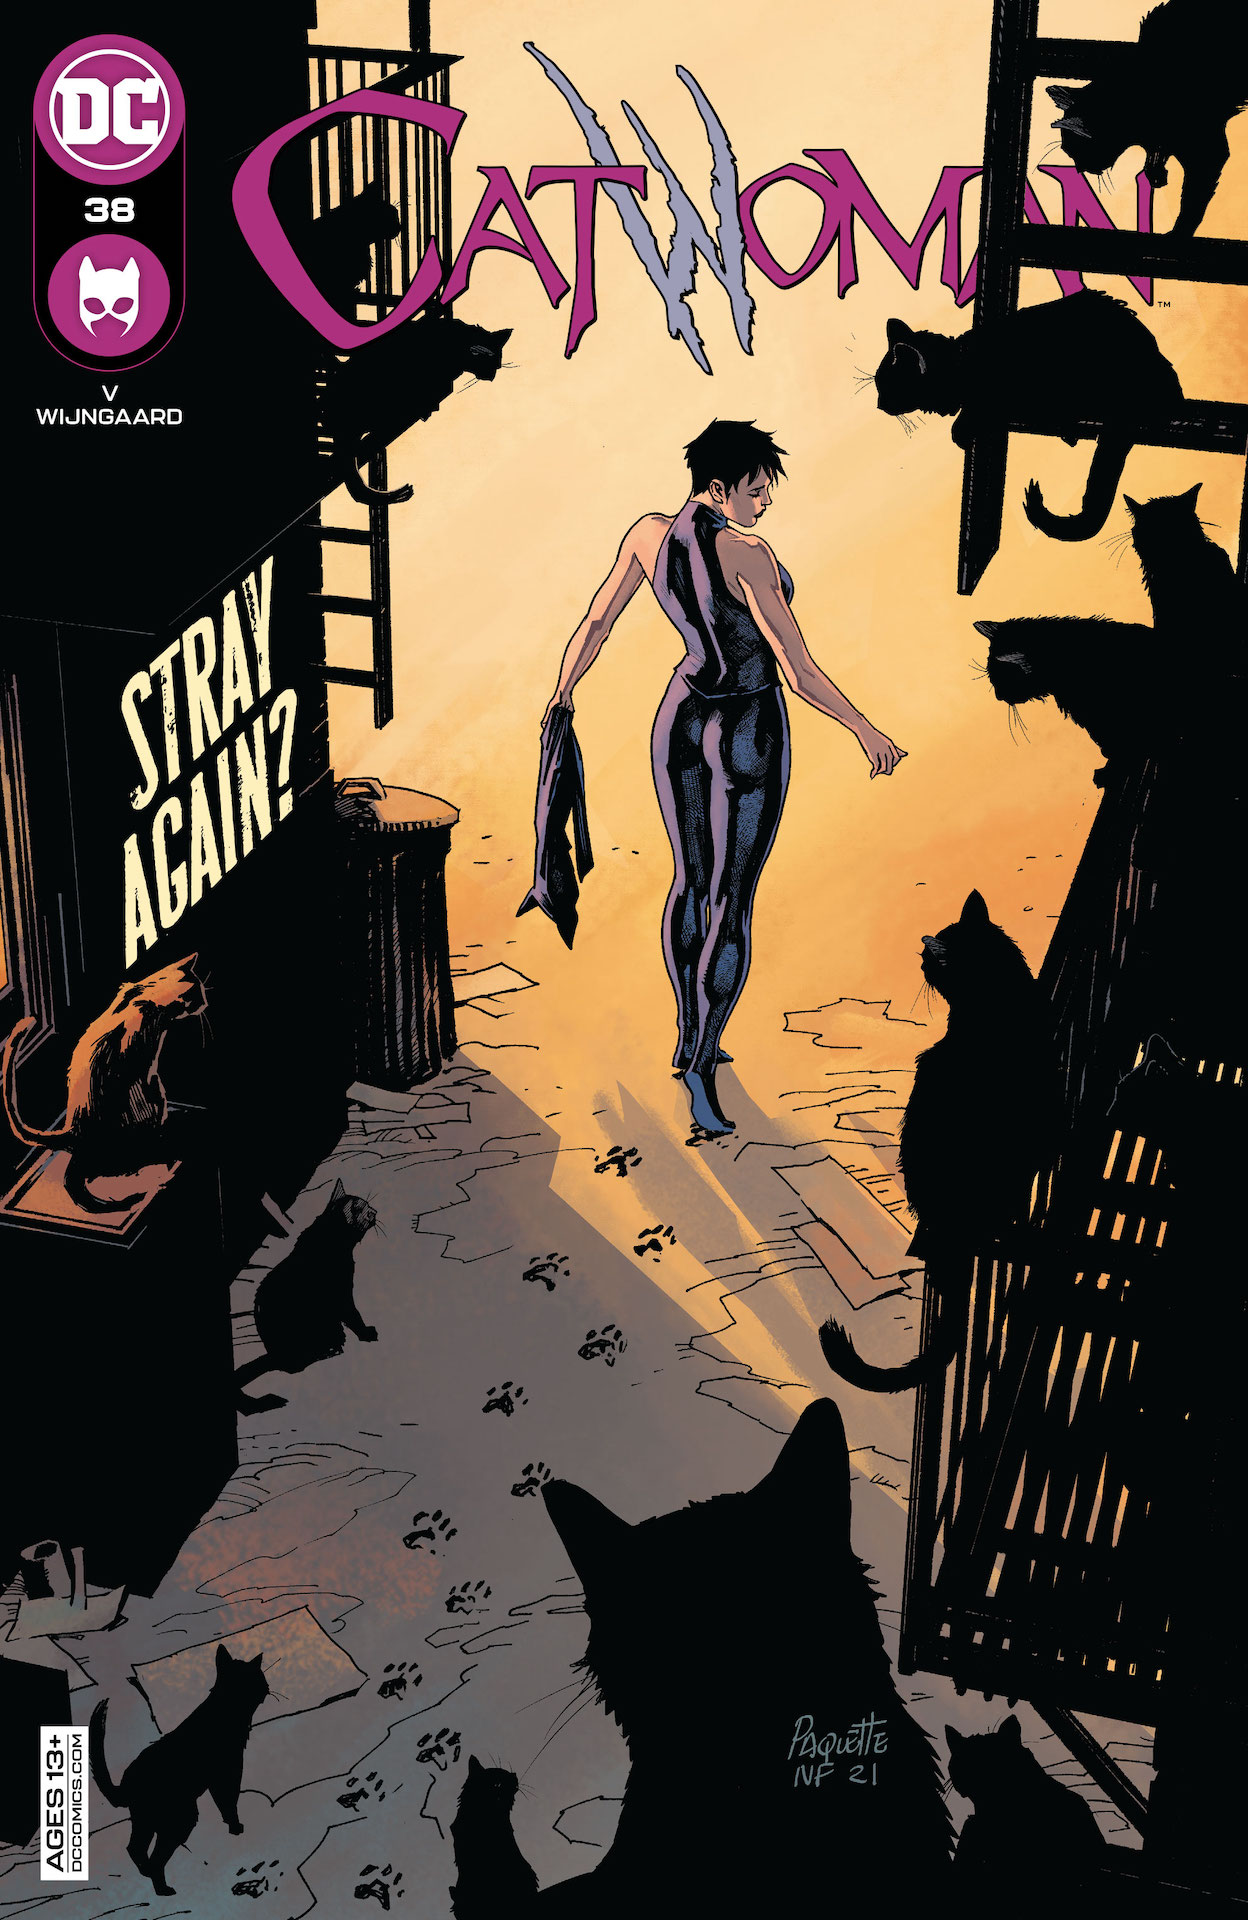 DC Preview: Catwoman #38